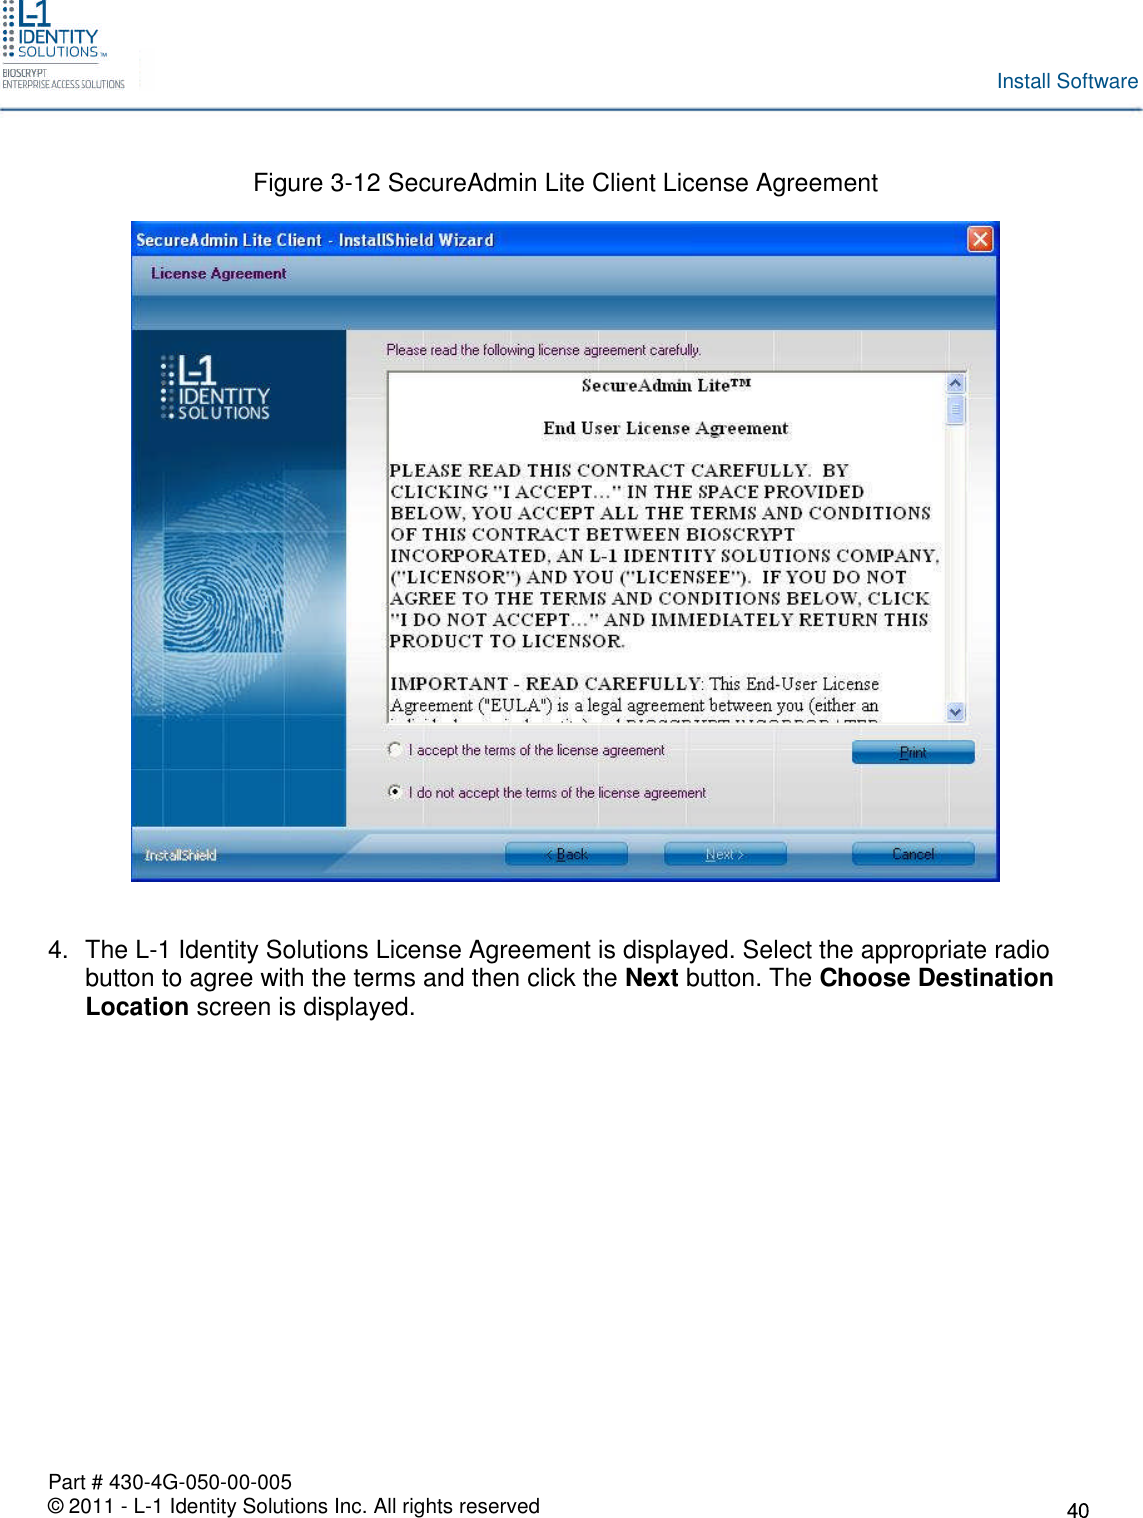 Part # 430-4G-050-00-005© 2011 - L-1 Identity Solutions Inc. All rights reservedInstall SoftwareFigure 3-12 SecureAdmin Lite Client License Agreement4. The L-1 Identity Solutions License Agreement is displayed. Select the appropriate radiobutton to agree with the terms and then click the Next button. The Choose DestinationLocation screen is displayed.